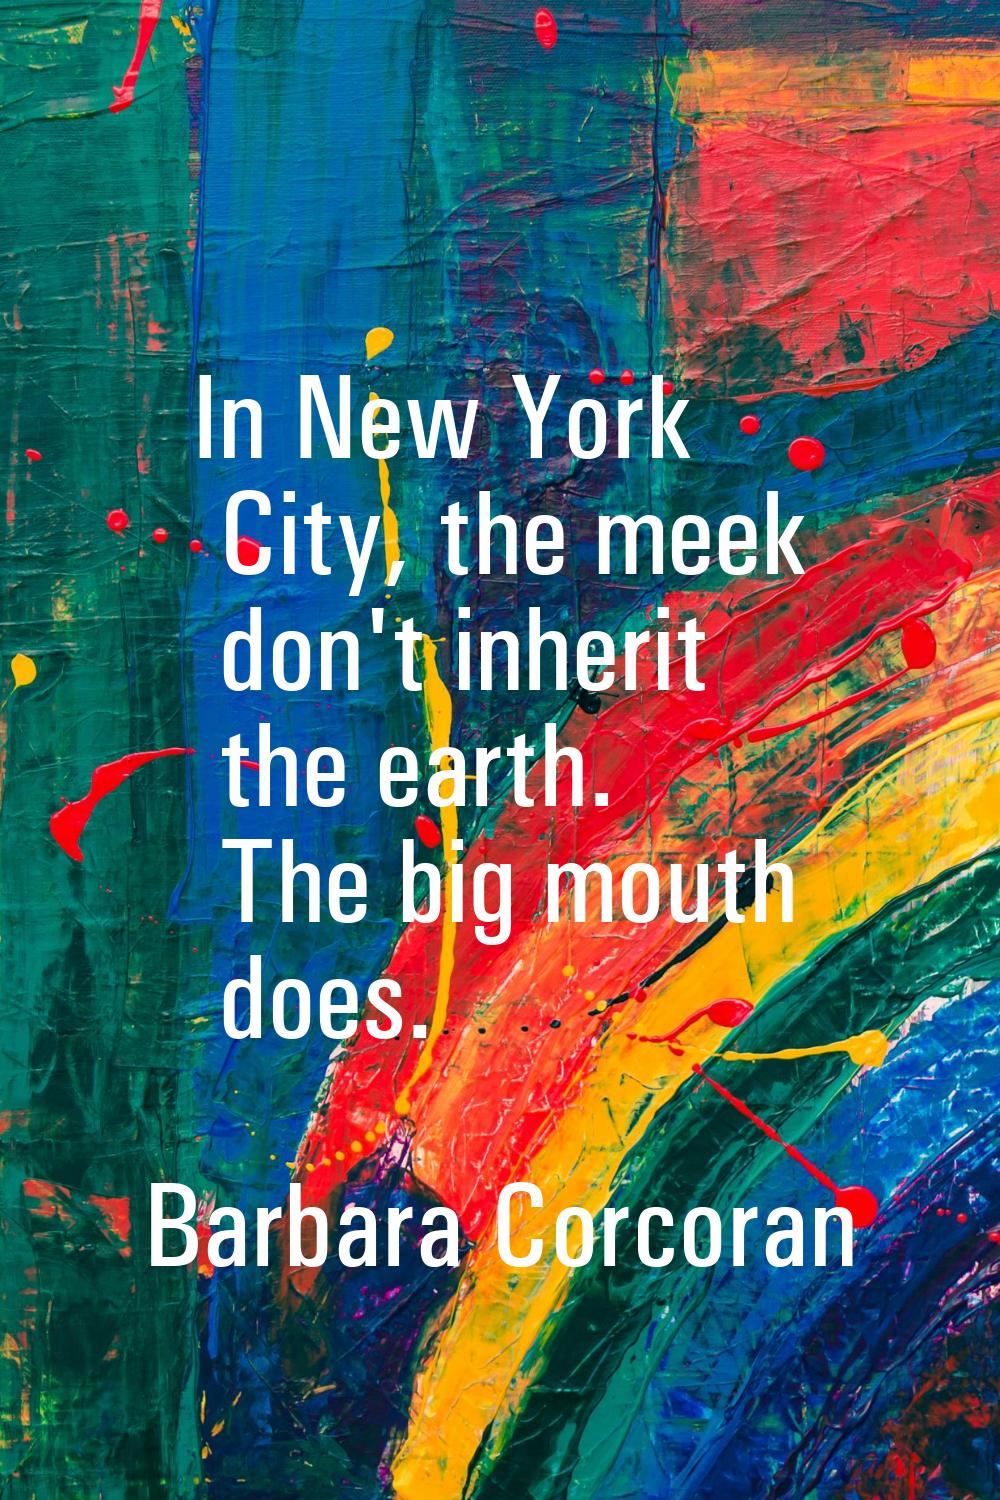 In New York City, the meek don't inherit the earth. The big mouth does.